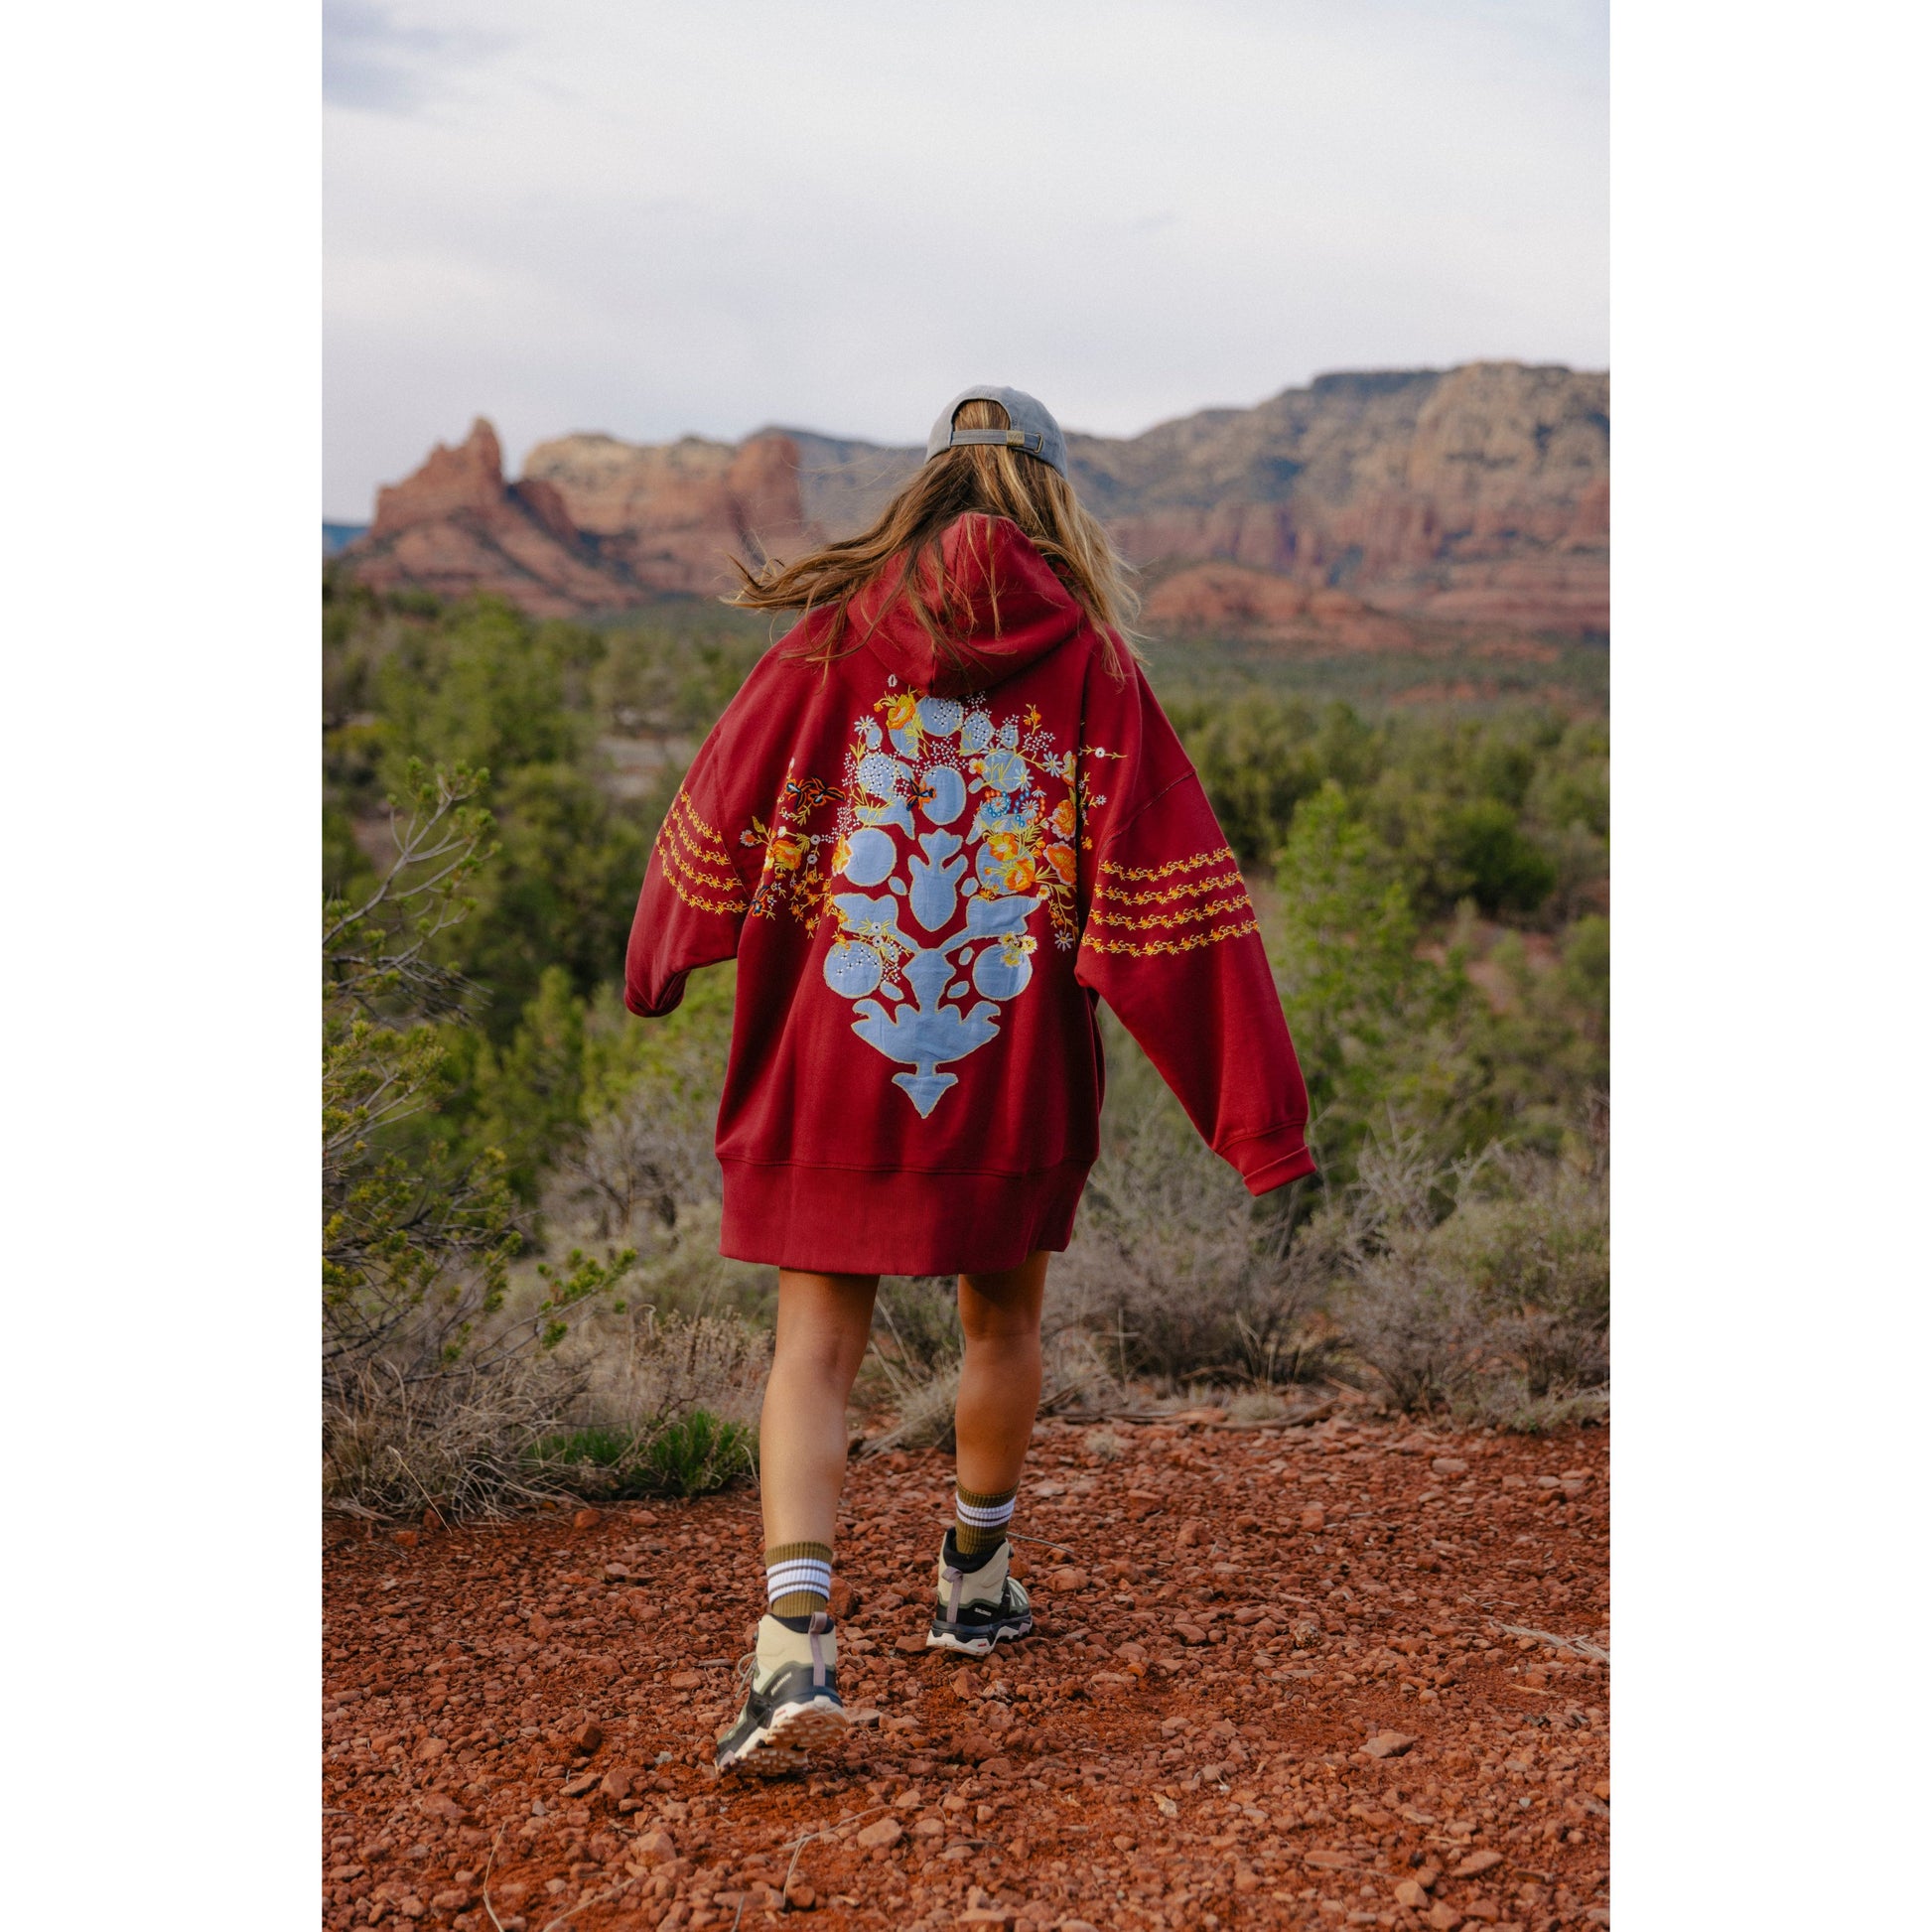 A woman in a Free People Movement At My Best Embroidered Sweatshirt in Sour Cherry Combo and hiking boots walks on a red dirt trail with lush greenery and rocky terrain in the background.